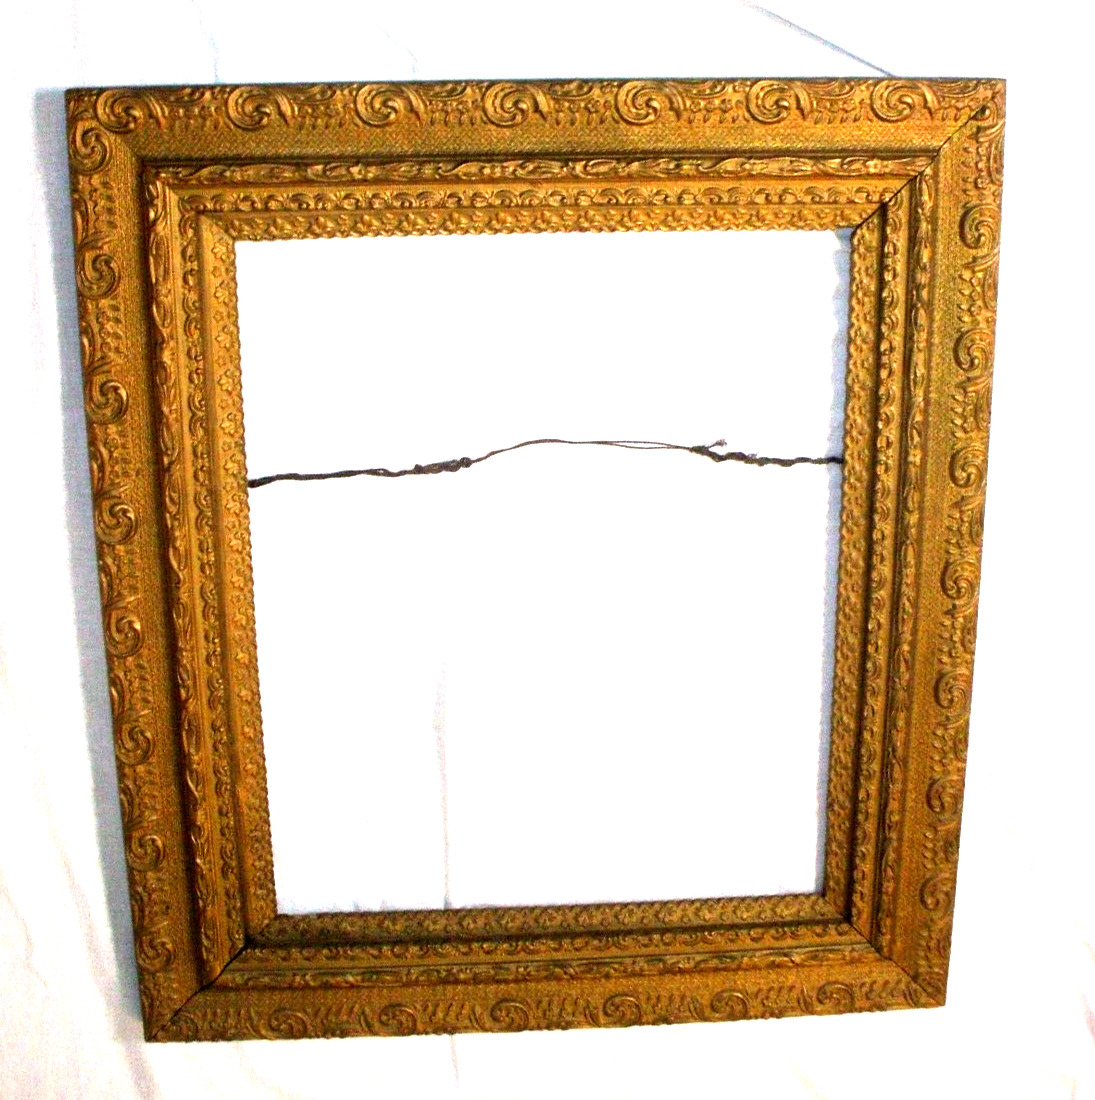 Larger Vintage Gold Tone Ornate Wooden  Picture Frame 26.5 by 30.5 in